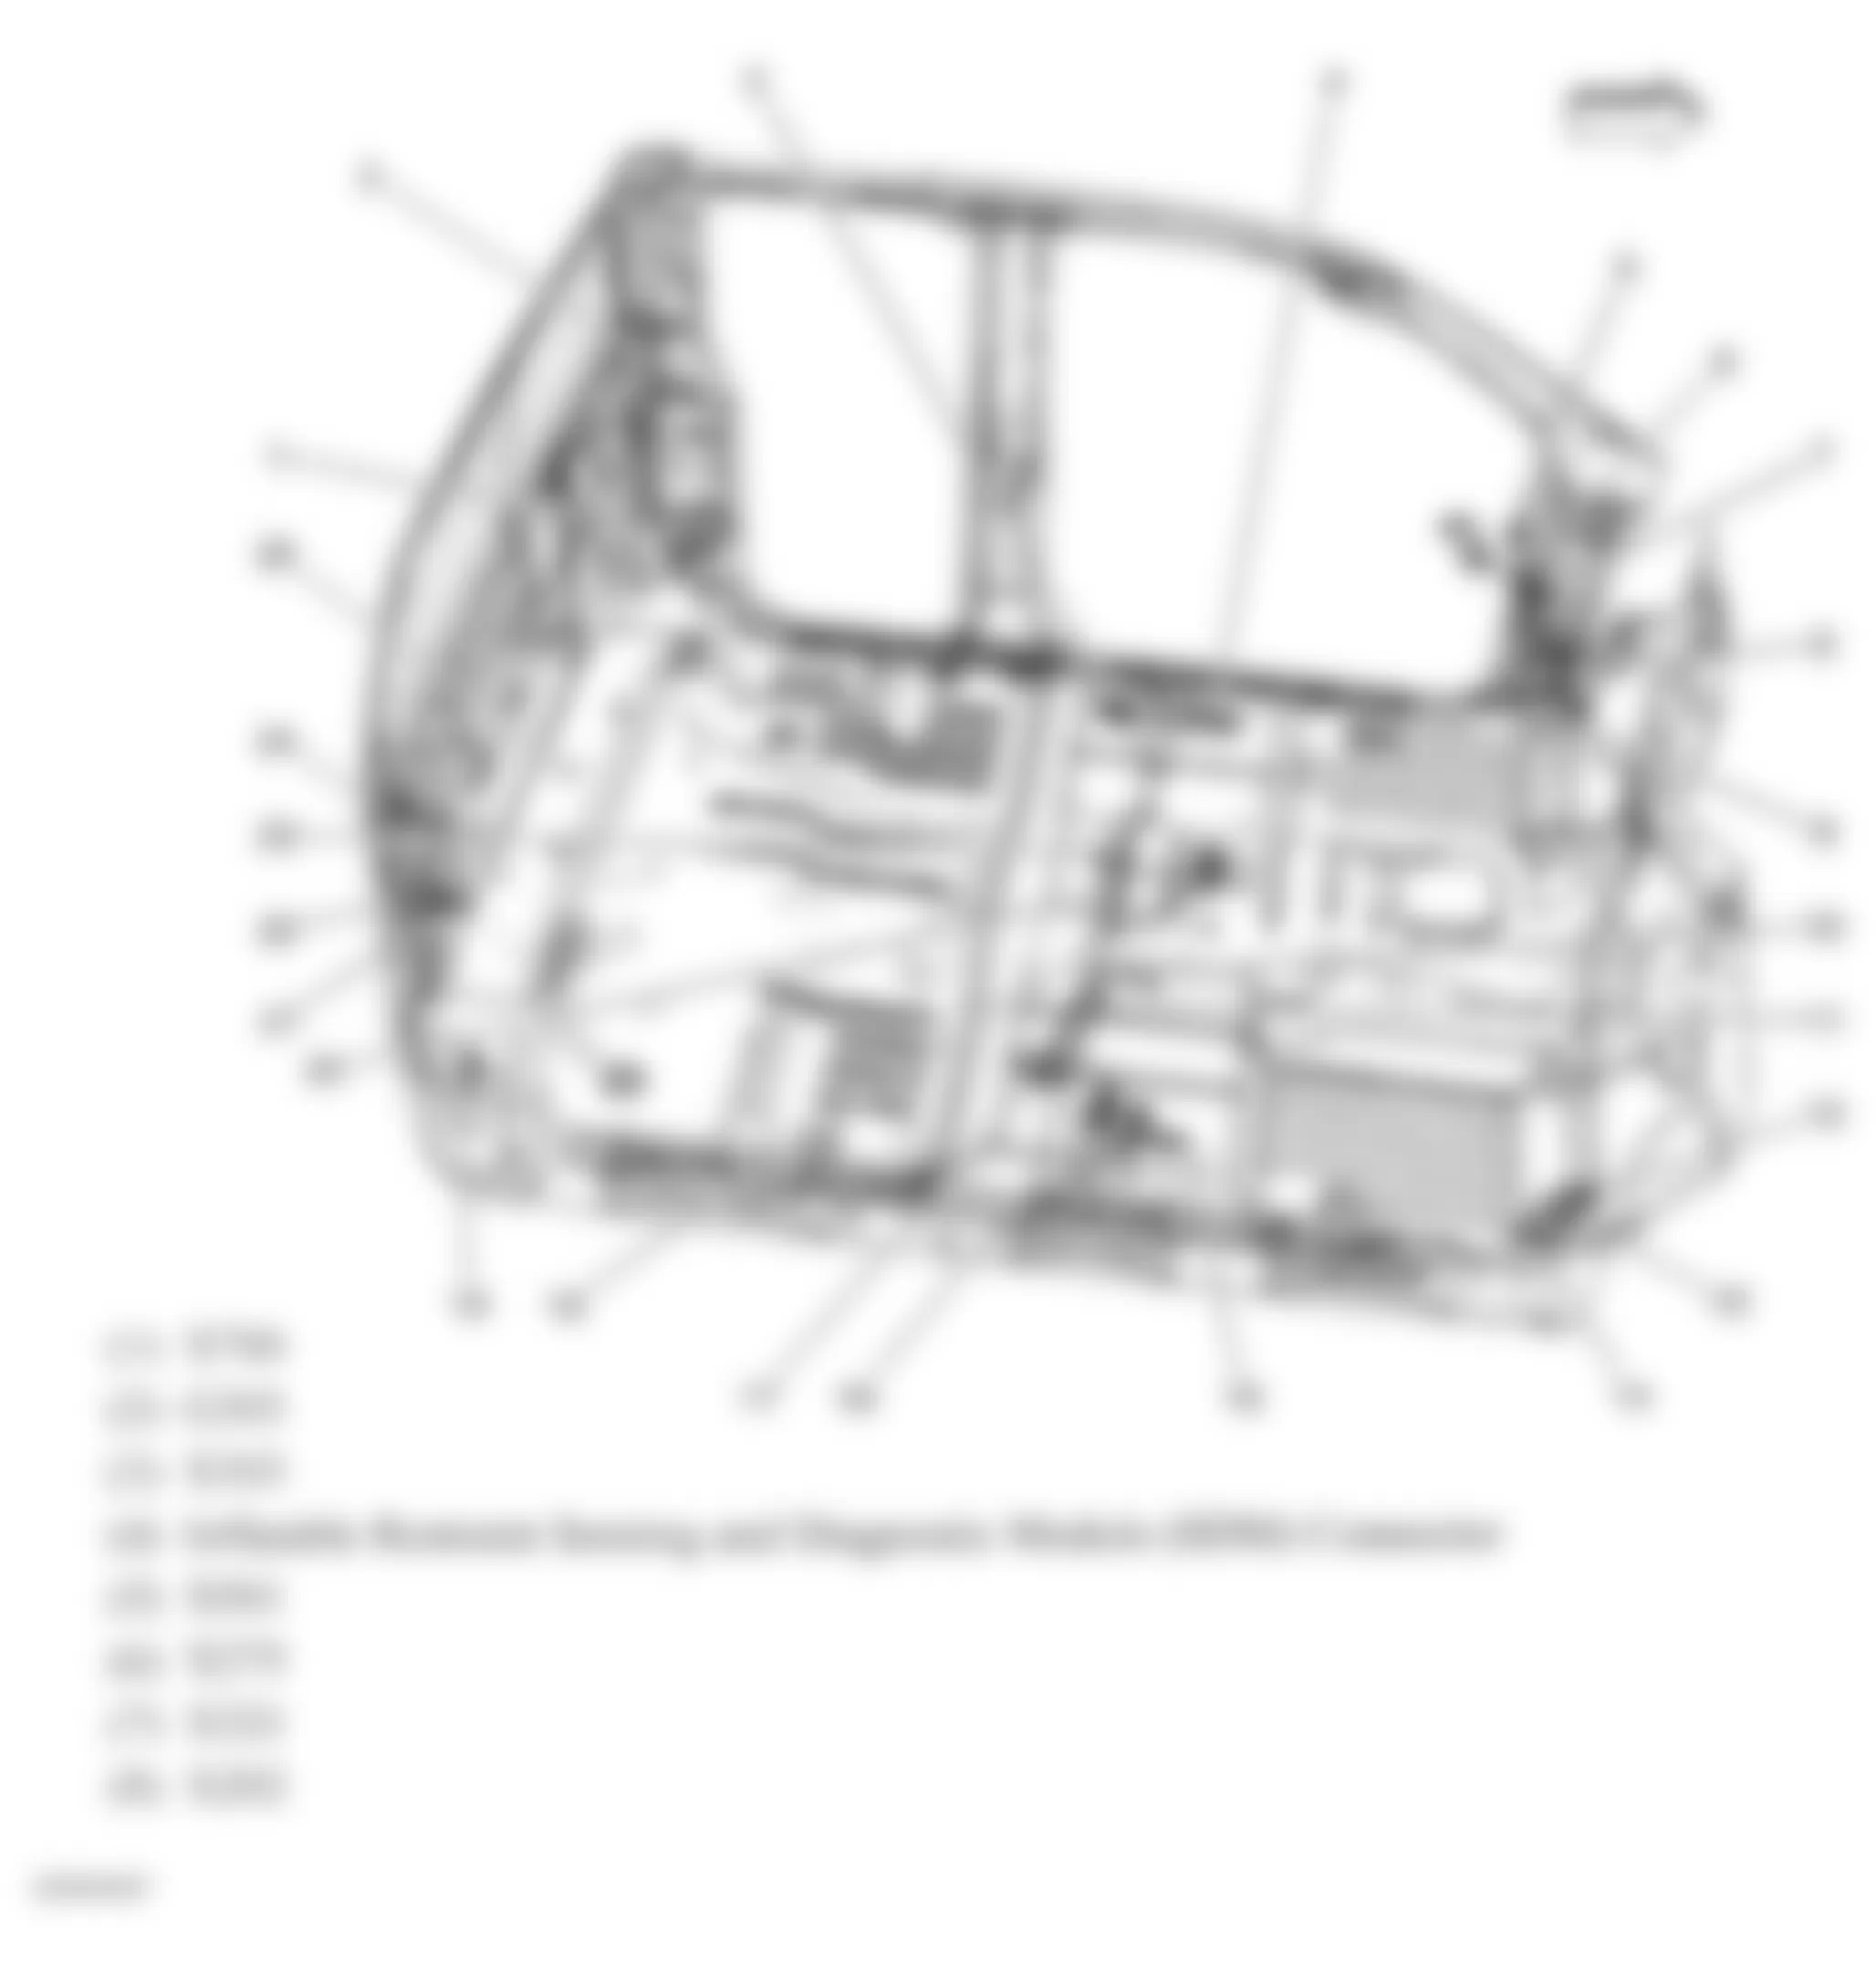 Chevrolet Silverado 2500 HD 2008 - Component Locations -  Passenger Compartment (Extended Cab) (1 Of 2)